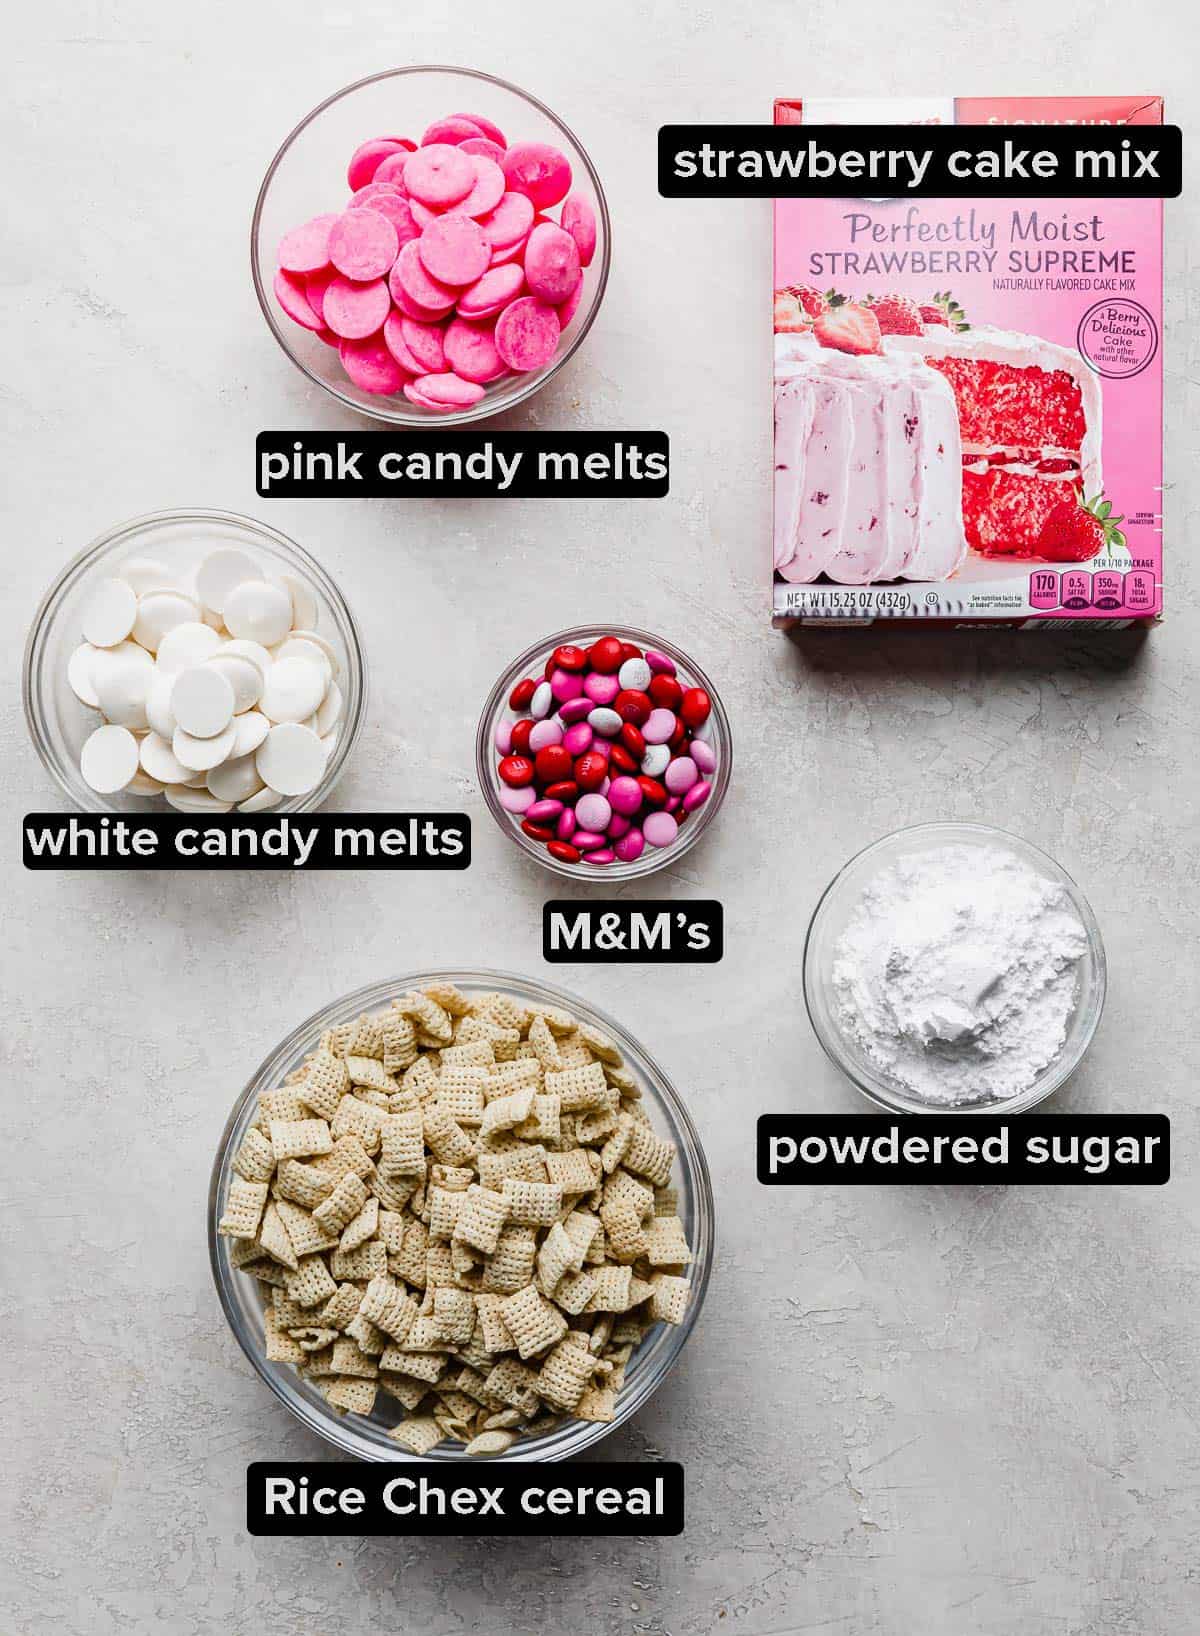 Ingredients used to make strawberry Chex mix (pink muddy buddies) on a gray background.